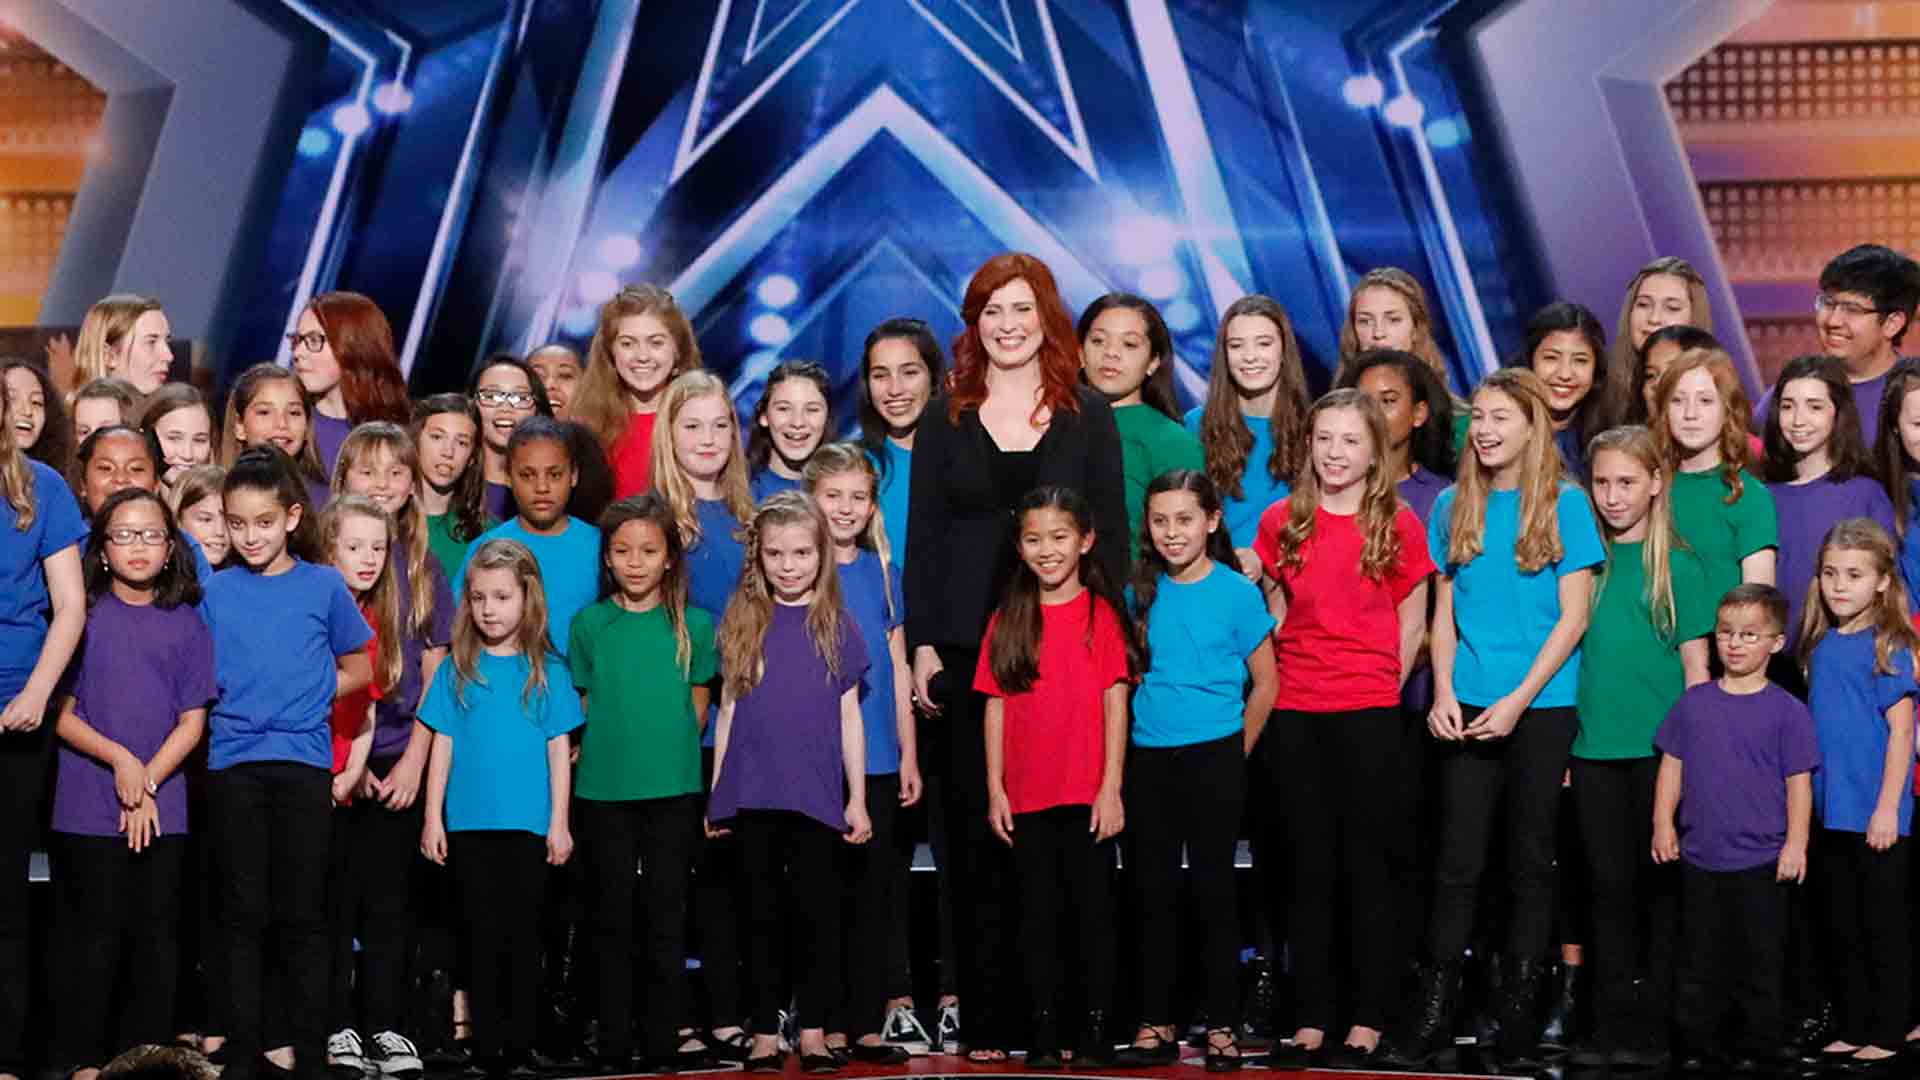 Watch America's Got Talent Highlight: Voices of Hope- Auditions - NBC.com